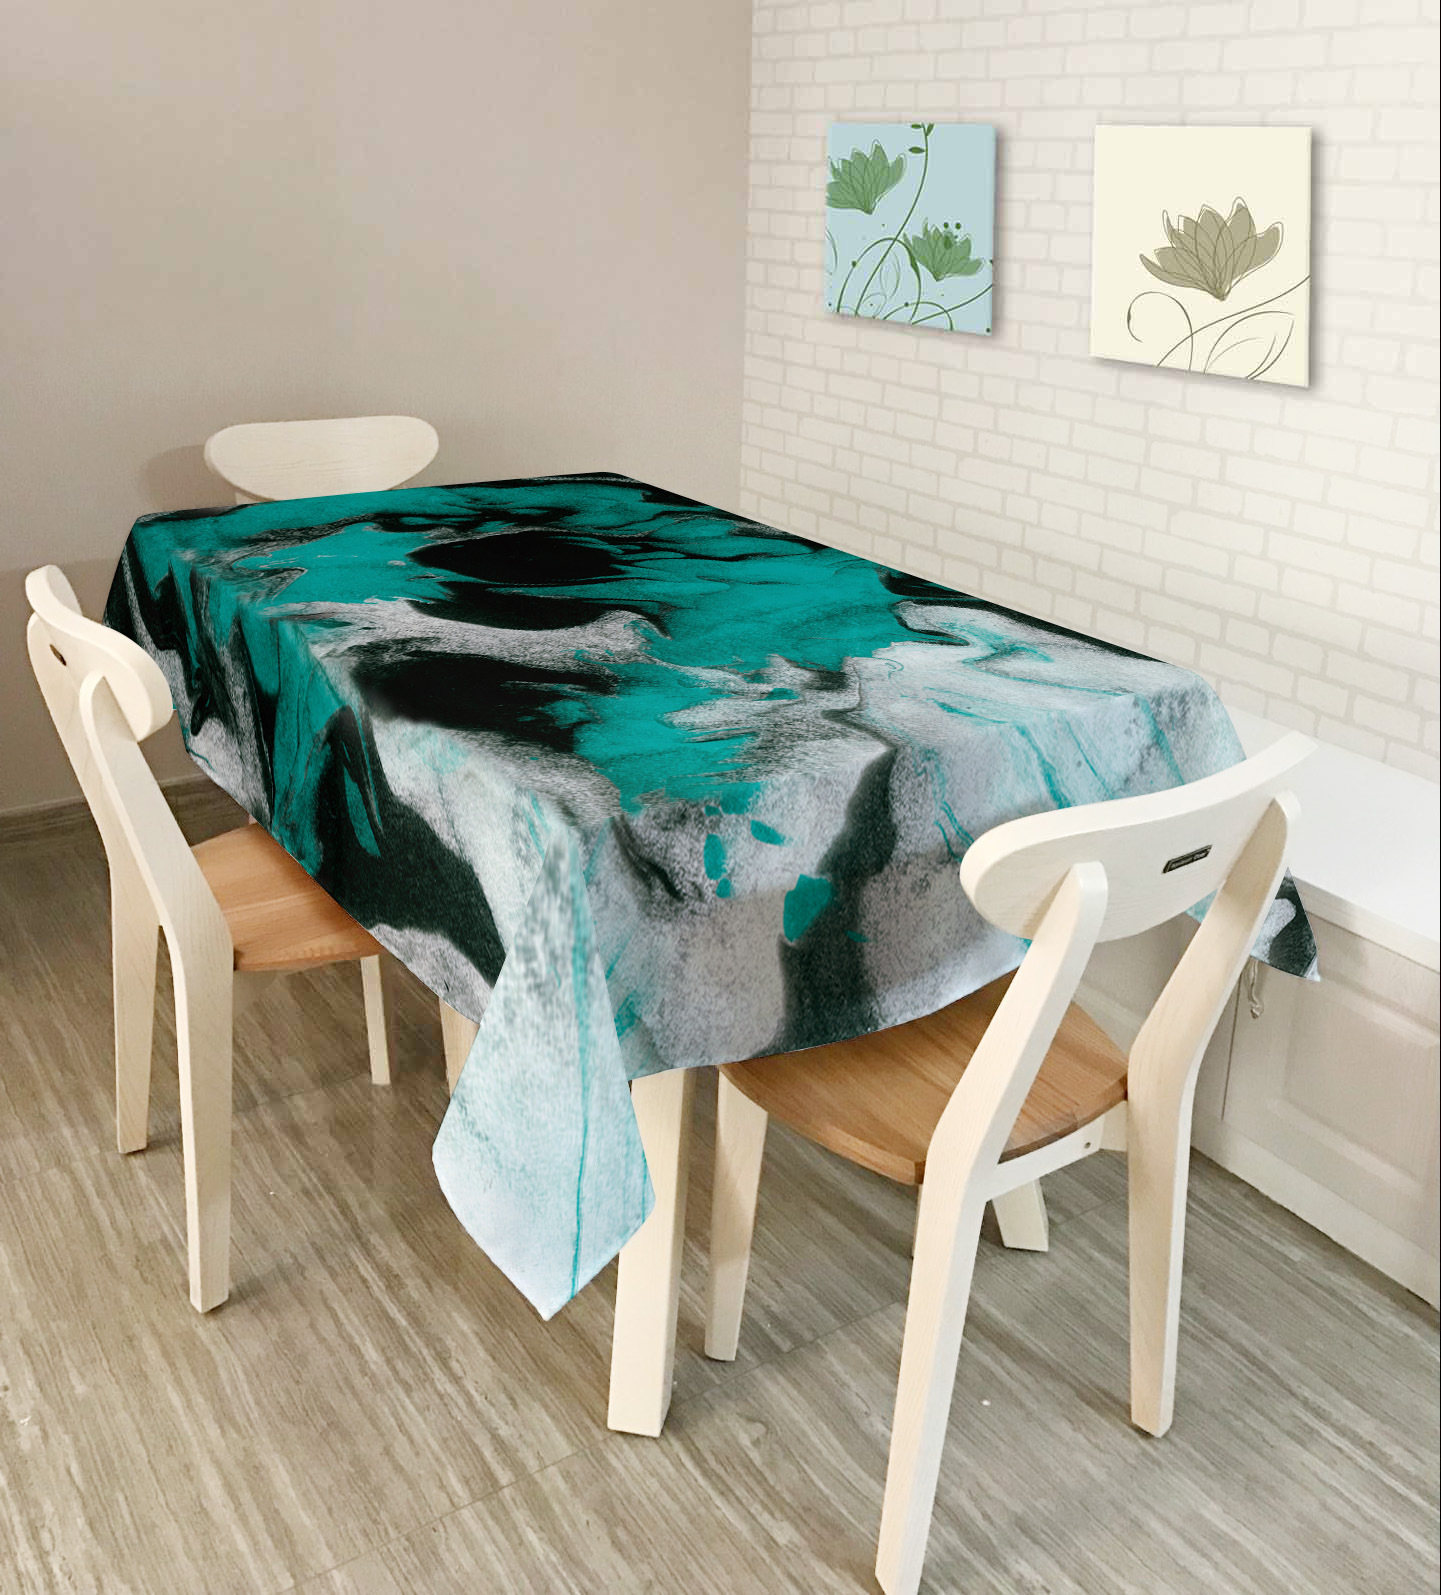 American-Style-Creative-Landscape-Tablecloth-Waterproof-Oil-Proof-Tea-Tablecloth-Home-Party-Decor-1185731-3